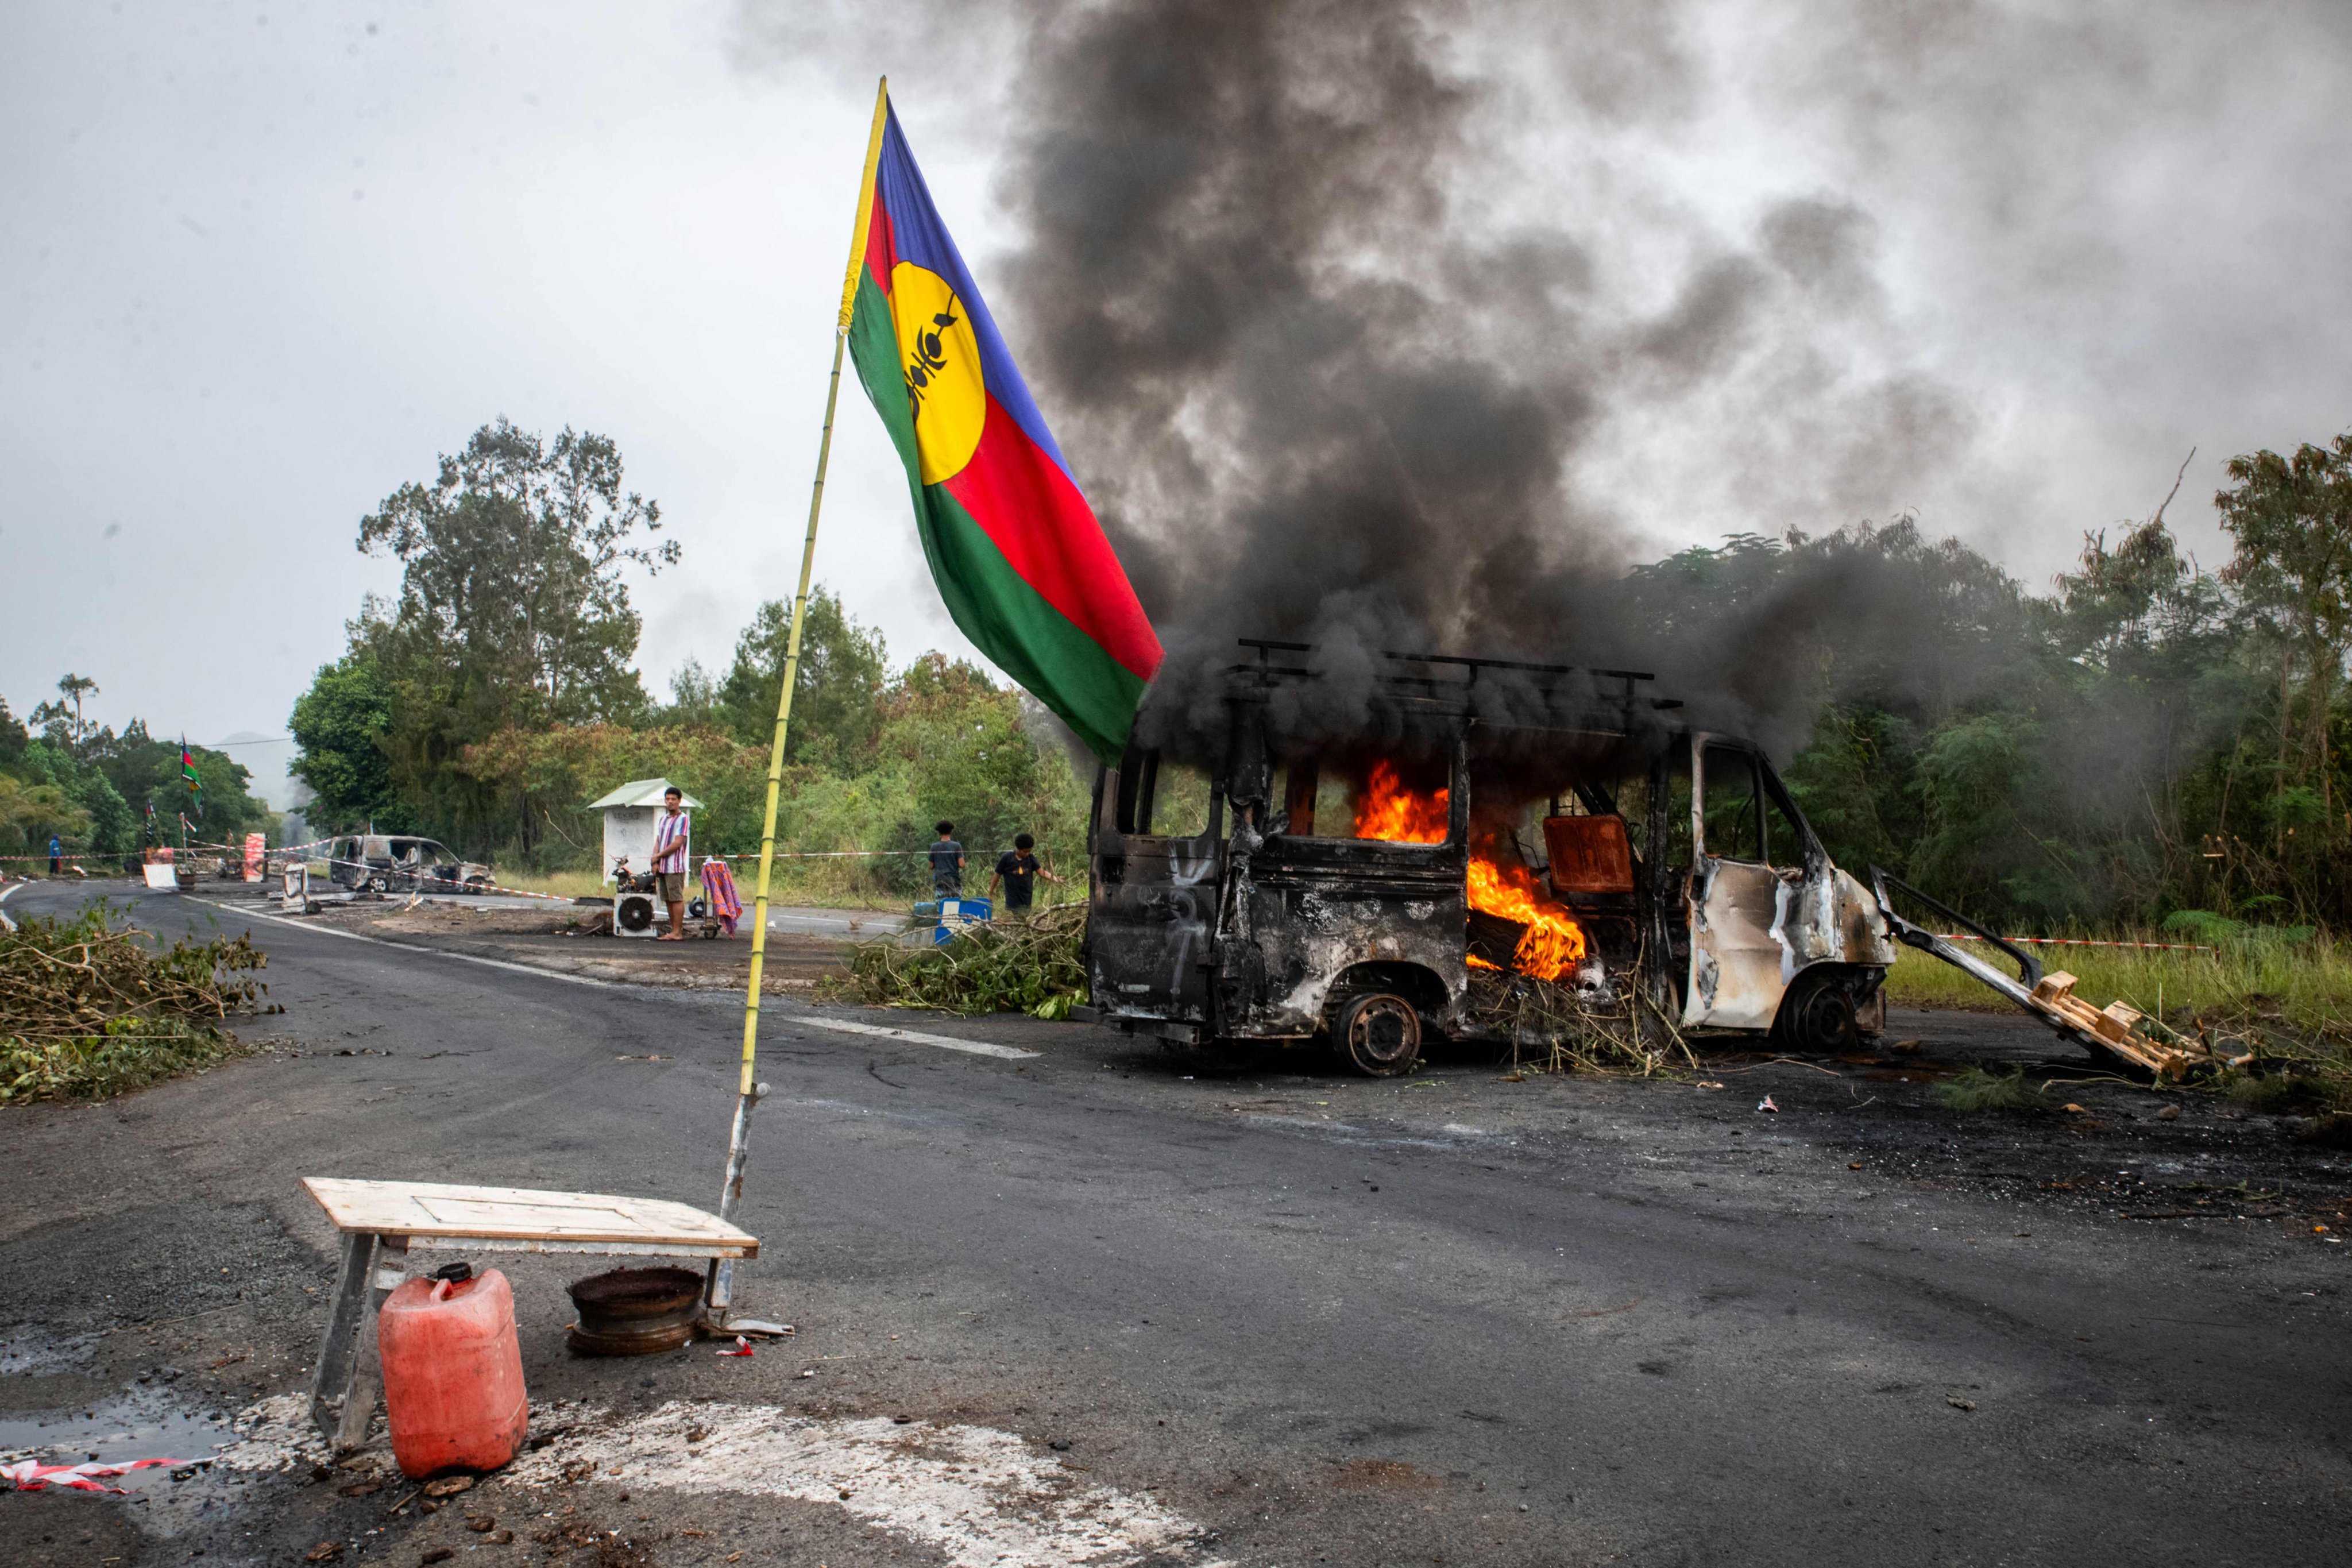 A Kanak flag is seen waving next to a burnt-out vehicle at a roadblock in New Caledonia. Three of the six people killed in the unrest were indigenous Kanaks shot by armed civilians. Photo: AFP